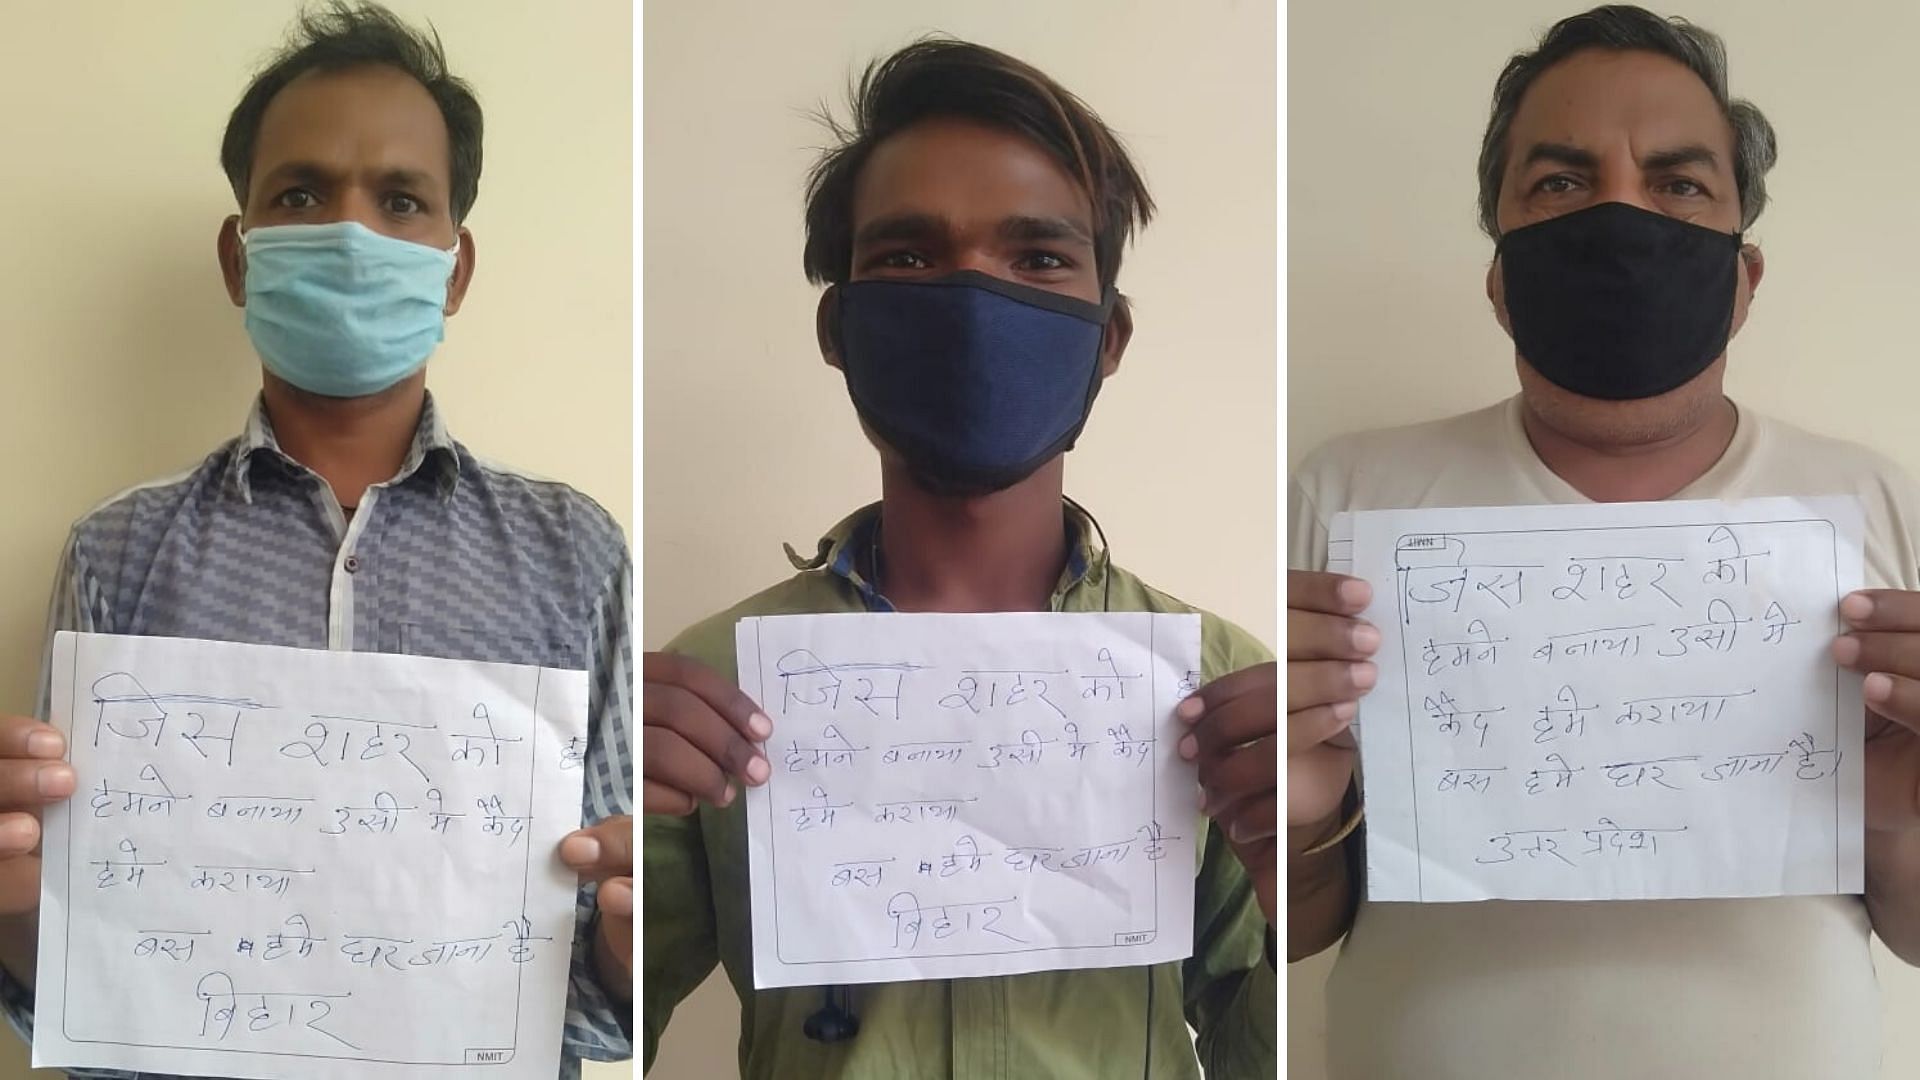 “We just want to go home,” read the placards, held up by migrant workers wearing masks,